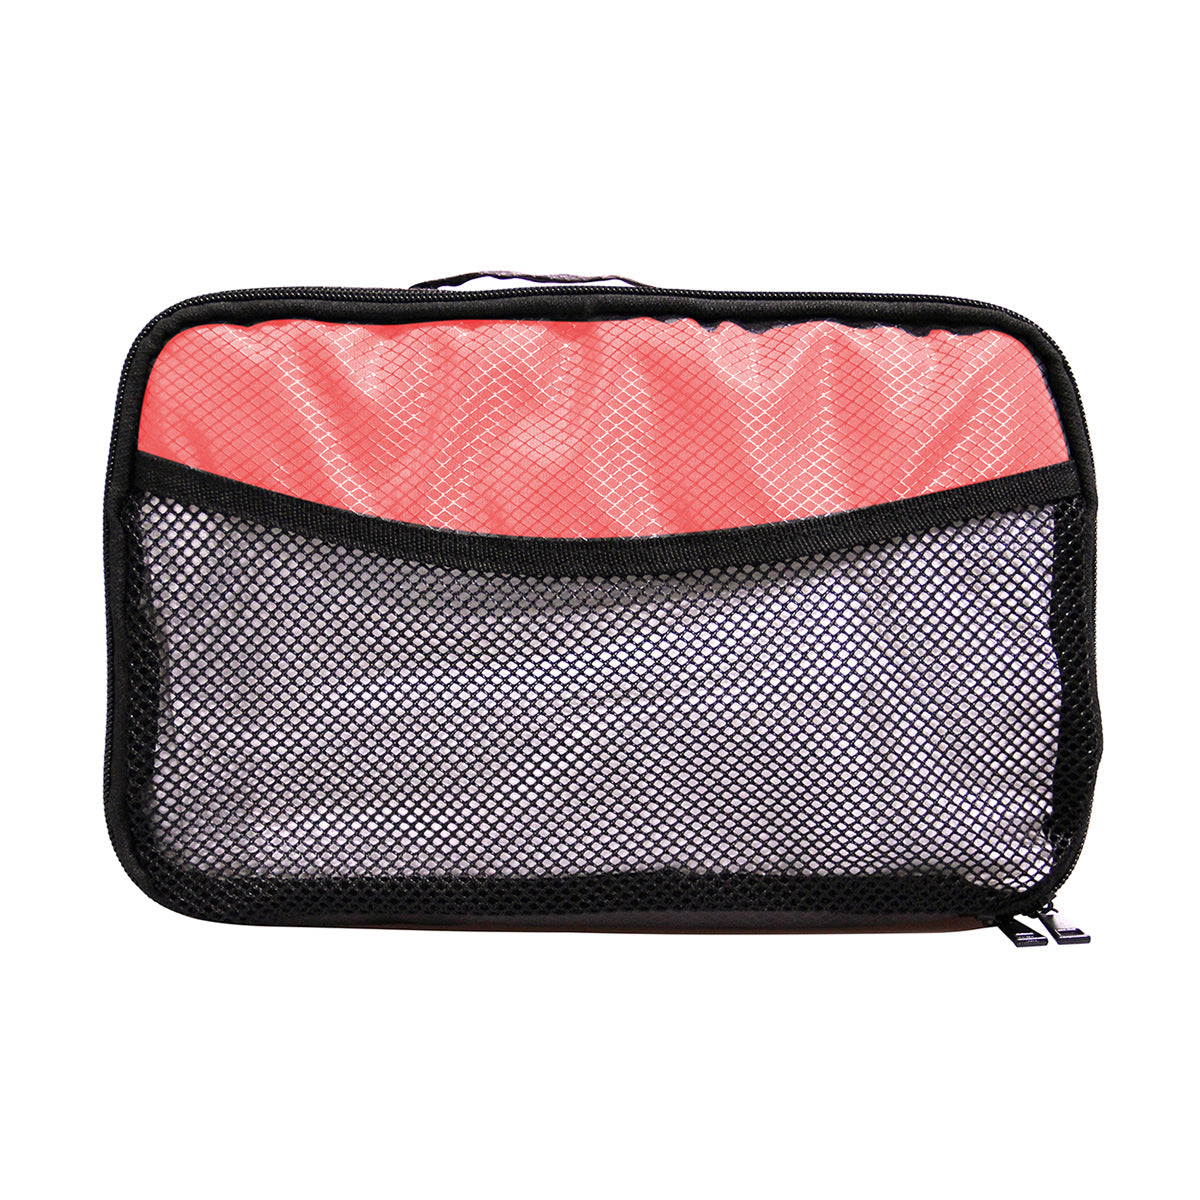 Travel Packing Cubes Mesh Lightweight Bags For Luggage - PACK OF 3 S/M/L, 6 Colors